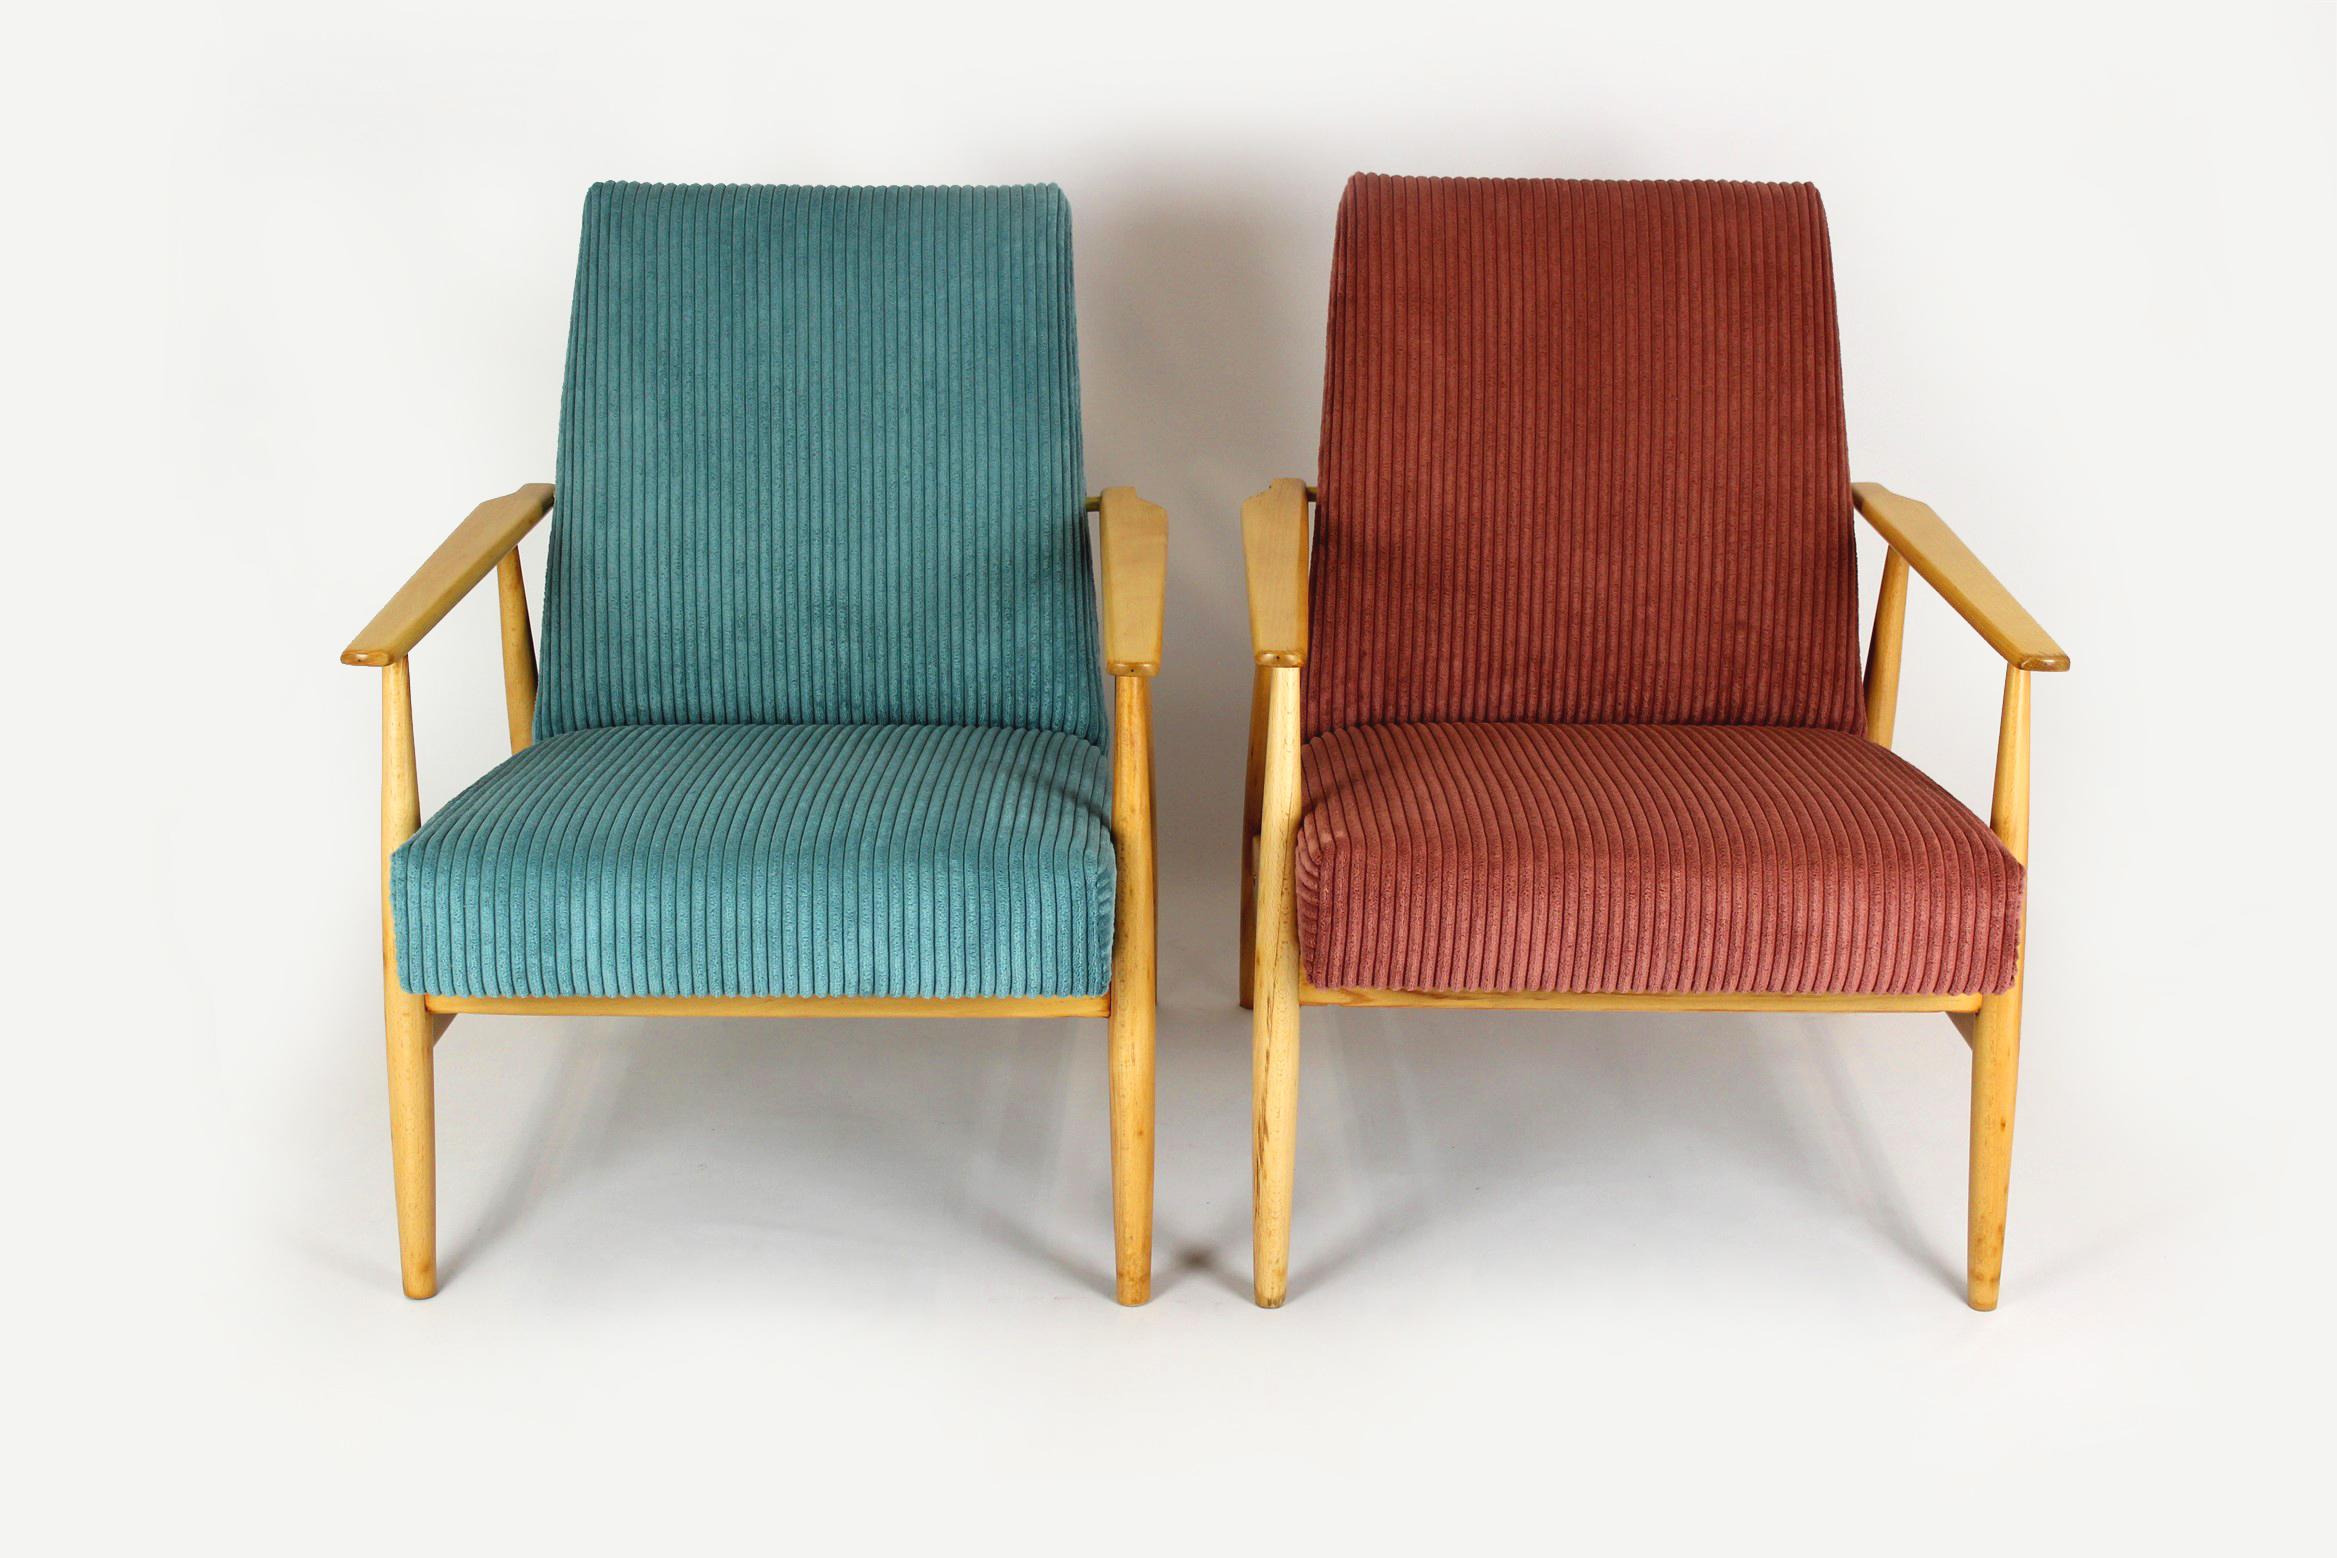 A pair of beechwood armchairs produced in the mid-1960s in Poland. These armchairs have been completely restored. The wood has been lacquered in a satin finish. The seats have been renewed, upholstered in turquoise and pink fabric with increased